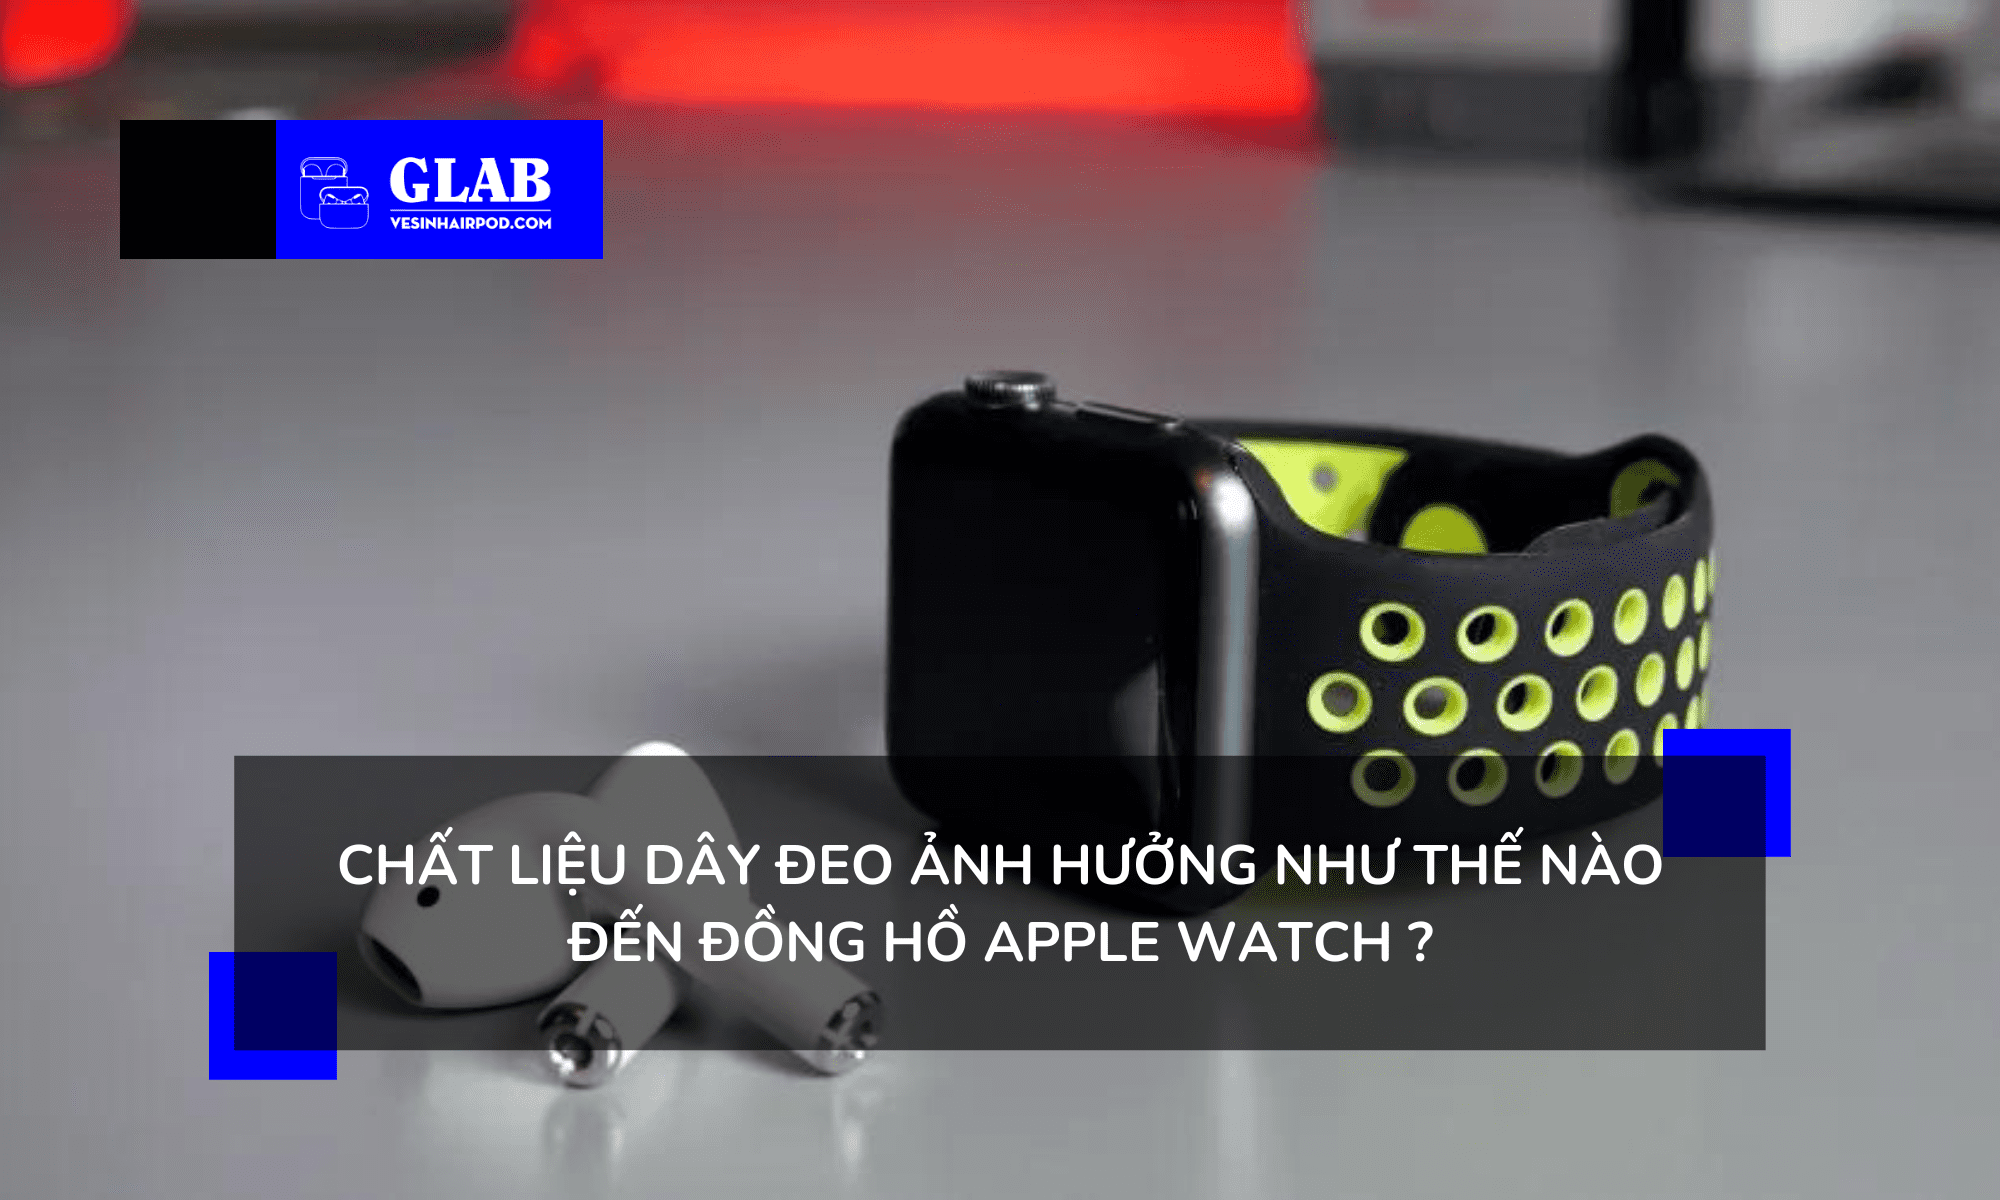 cac-loai-day-deo-dong-ho-apple-watch